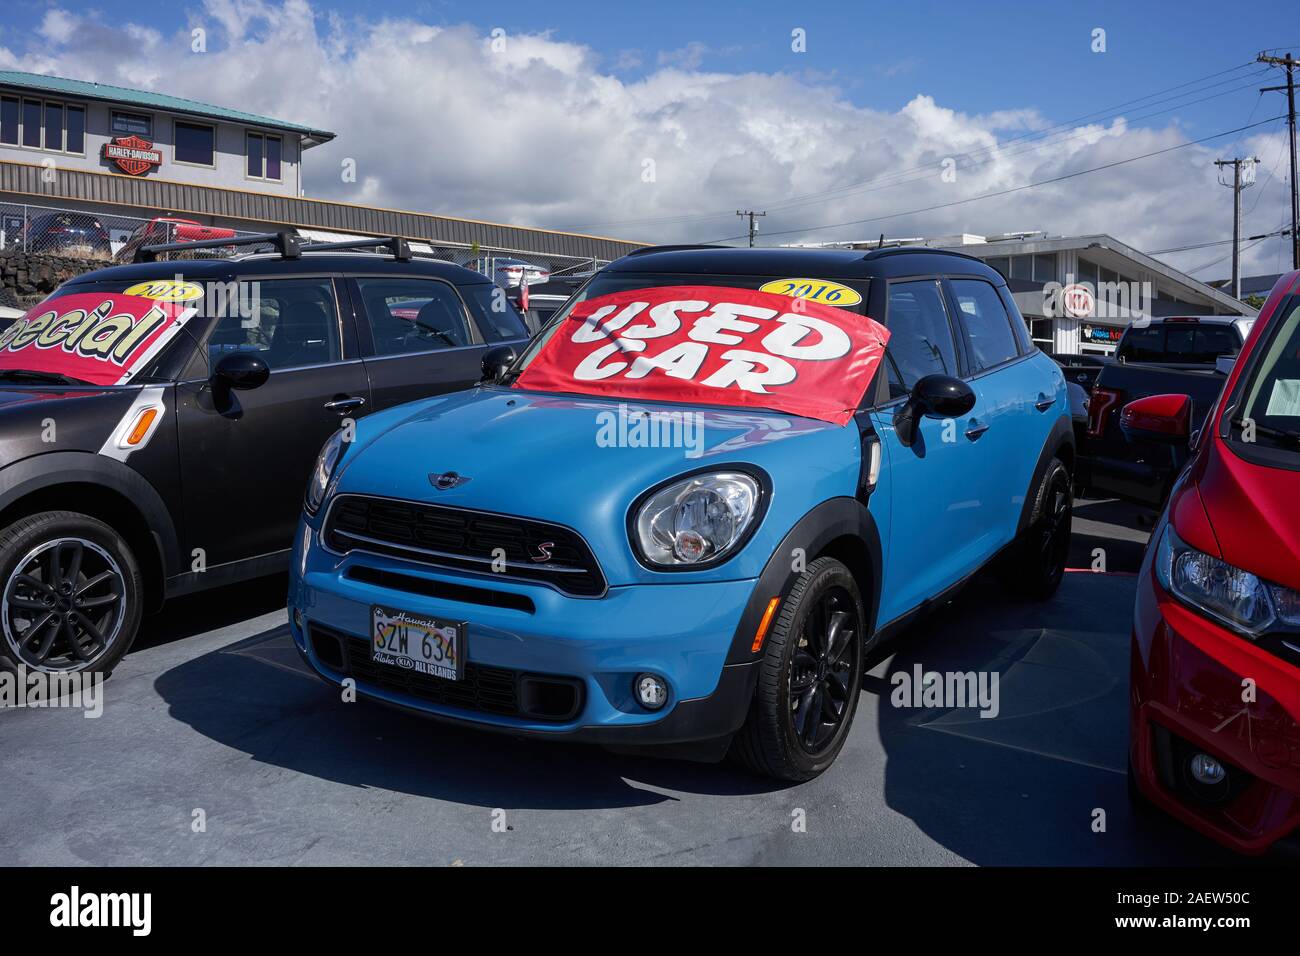 Used cars for sale in an auto dealership location in Kailua-Kona, Hawaii, seen on Friday, Nov 29, 2019. Stock Photo